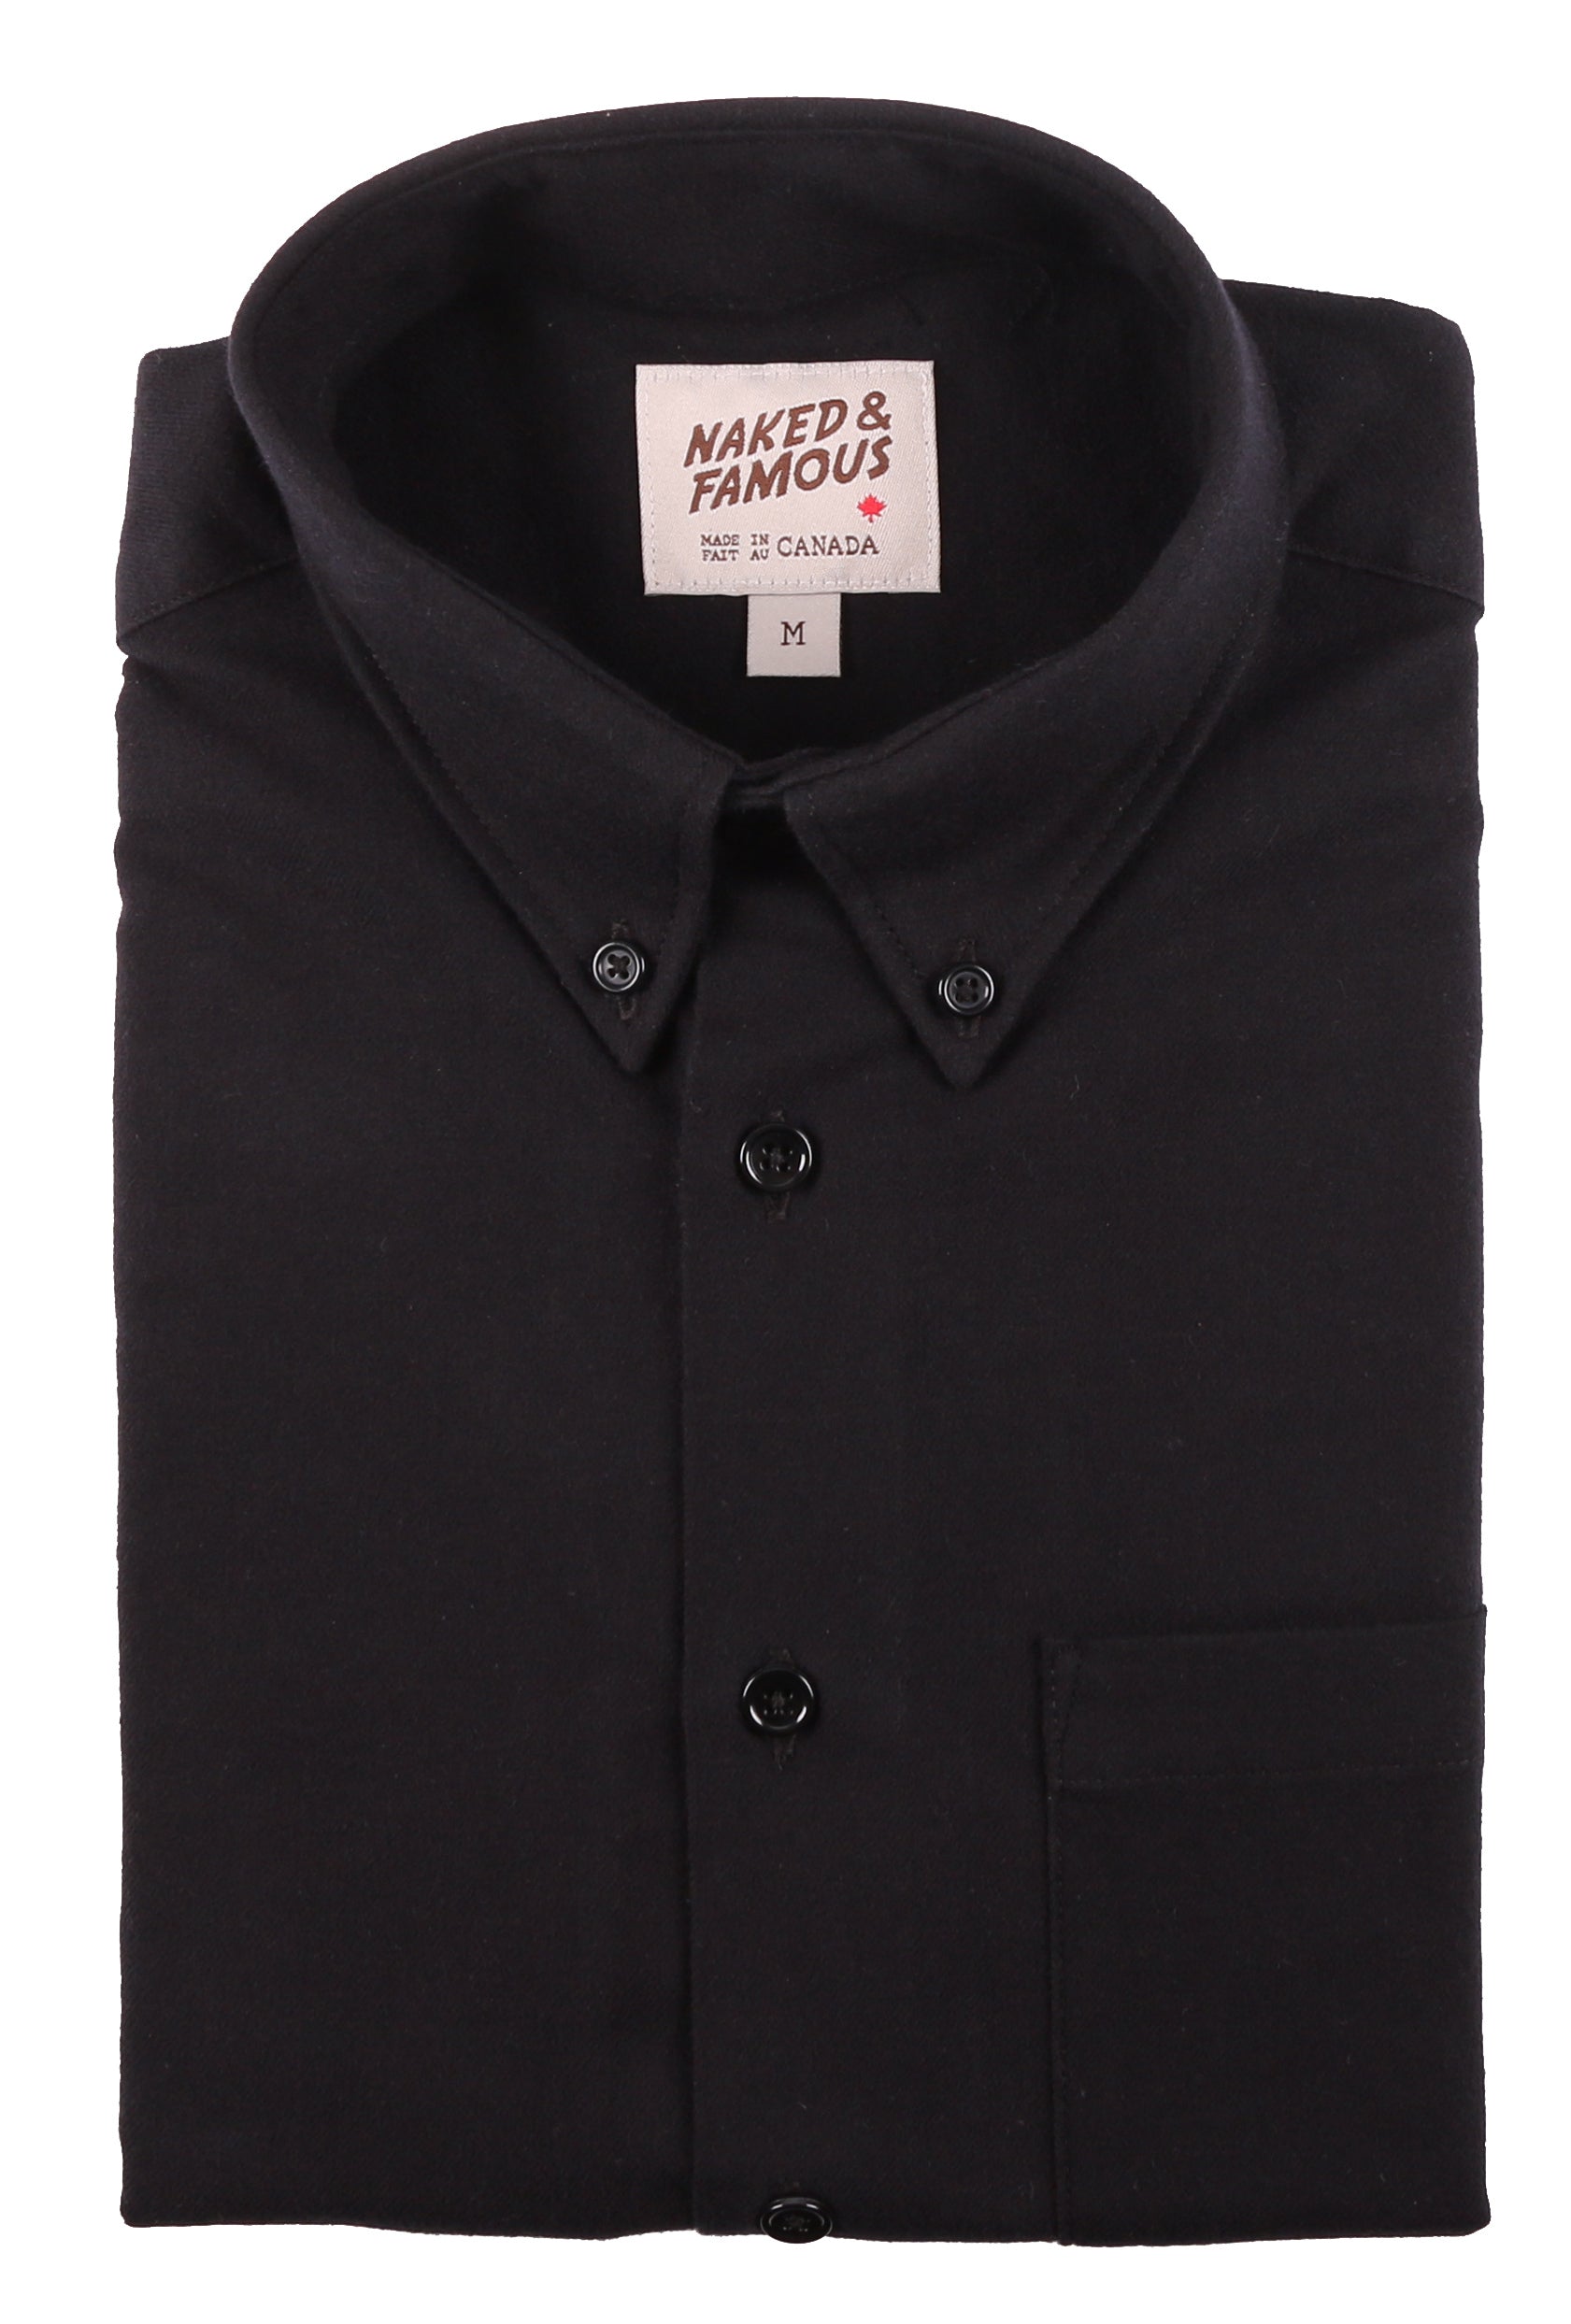 Naked & Famous - Easy Shirt - Solid Flannel Black